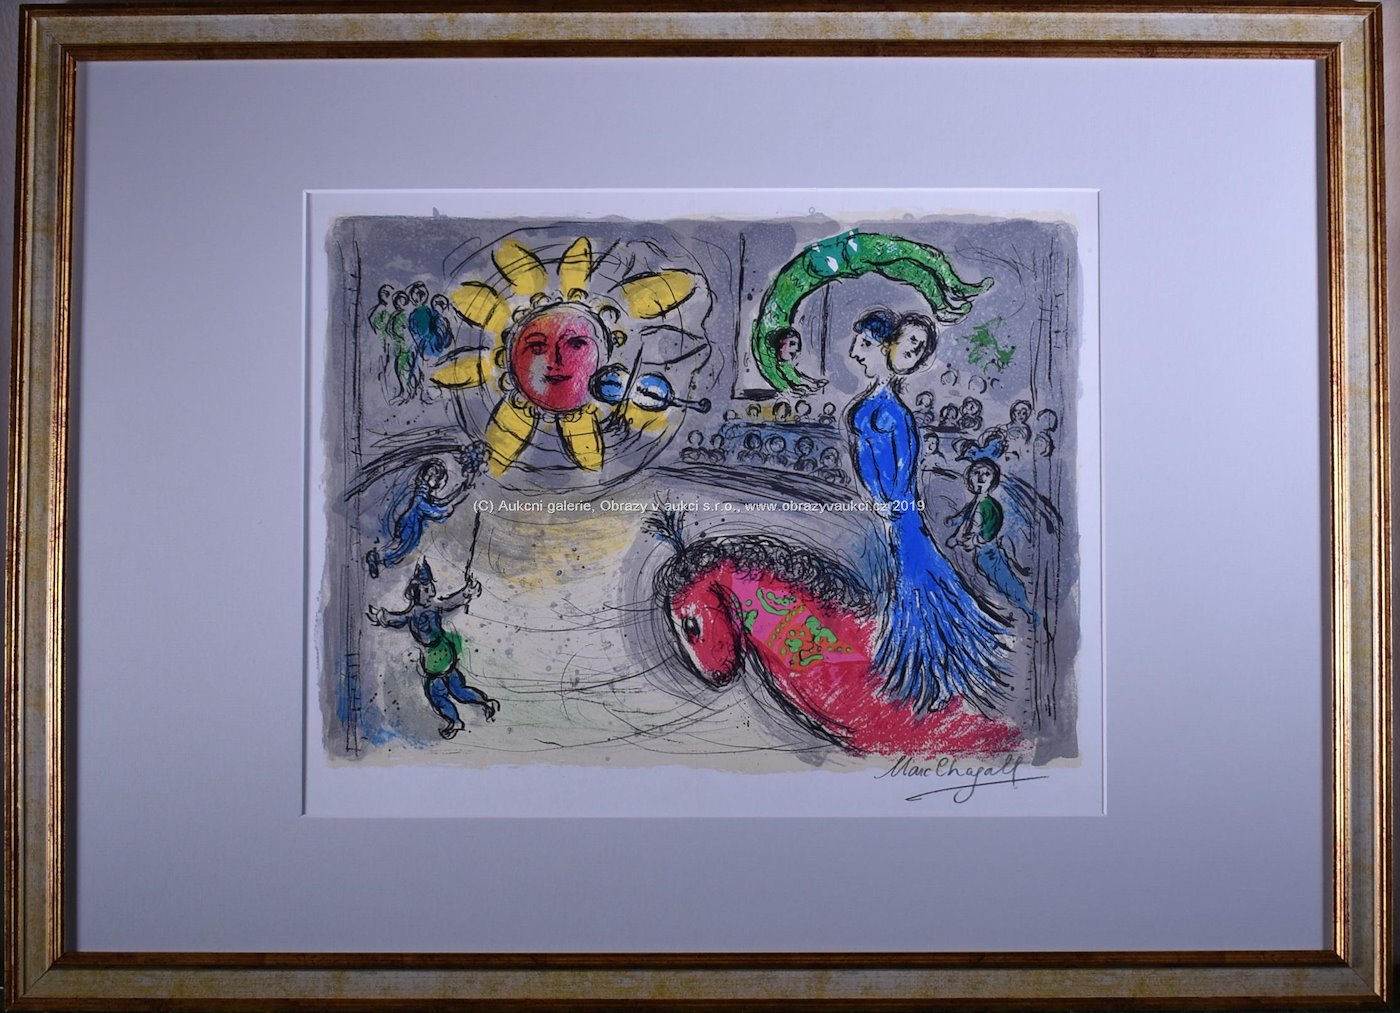 Marc Chagall - Soleil au cheval rouge (Sun with Red Horse)